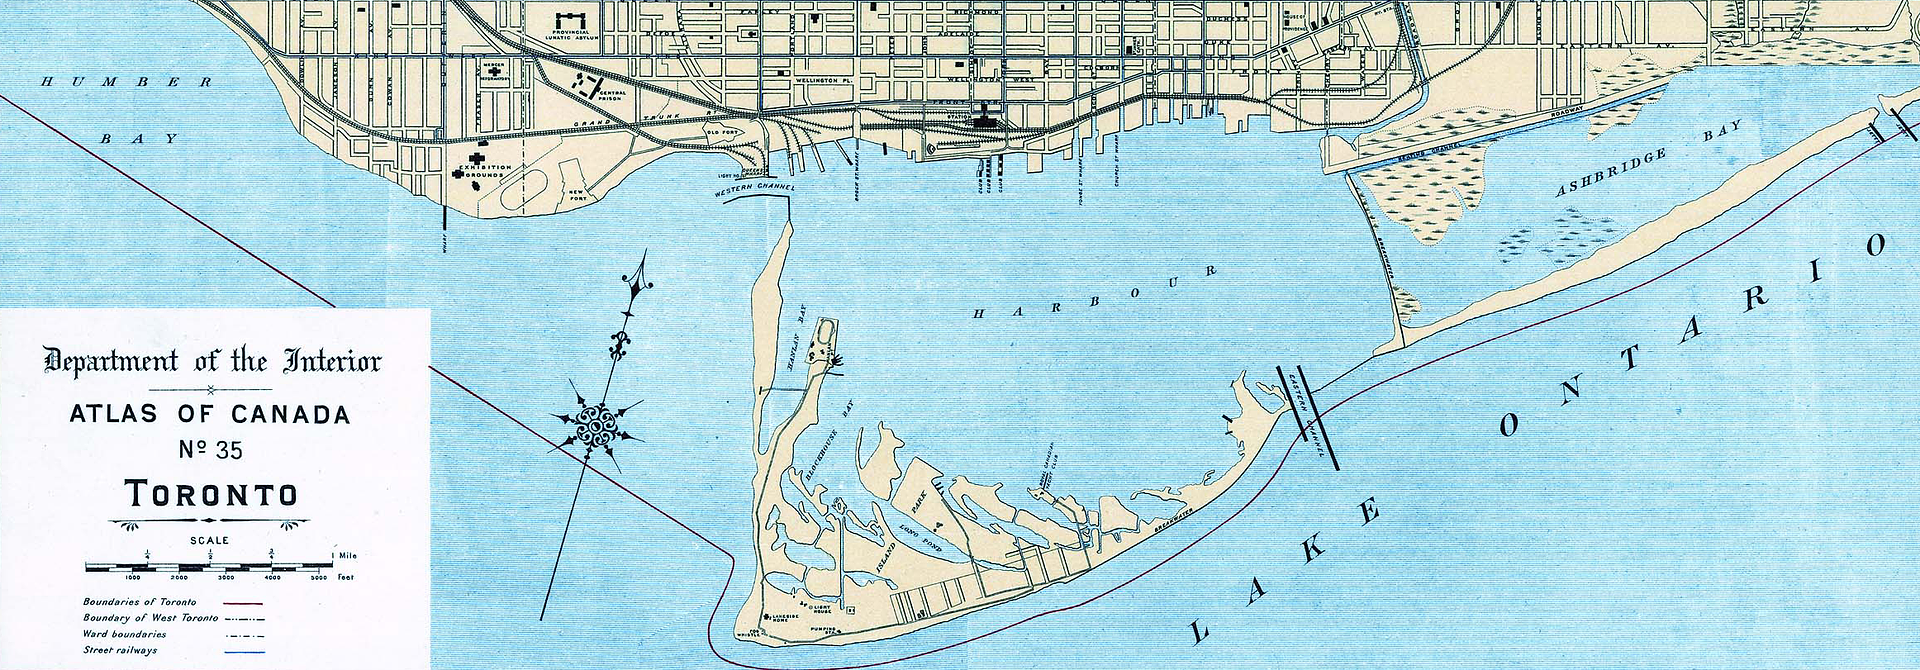 1906_Toronto_Harbour_map-1.png